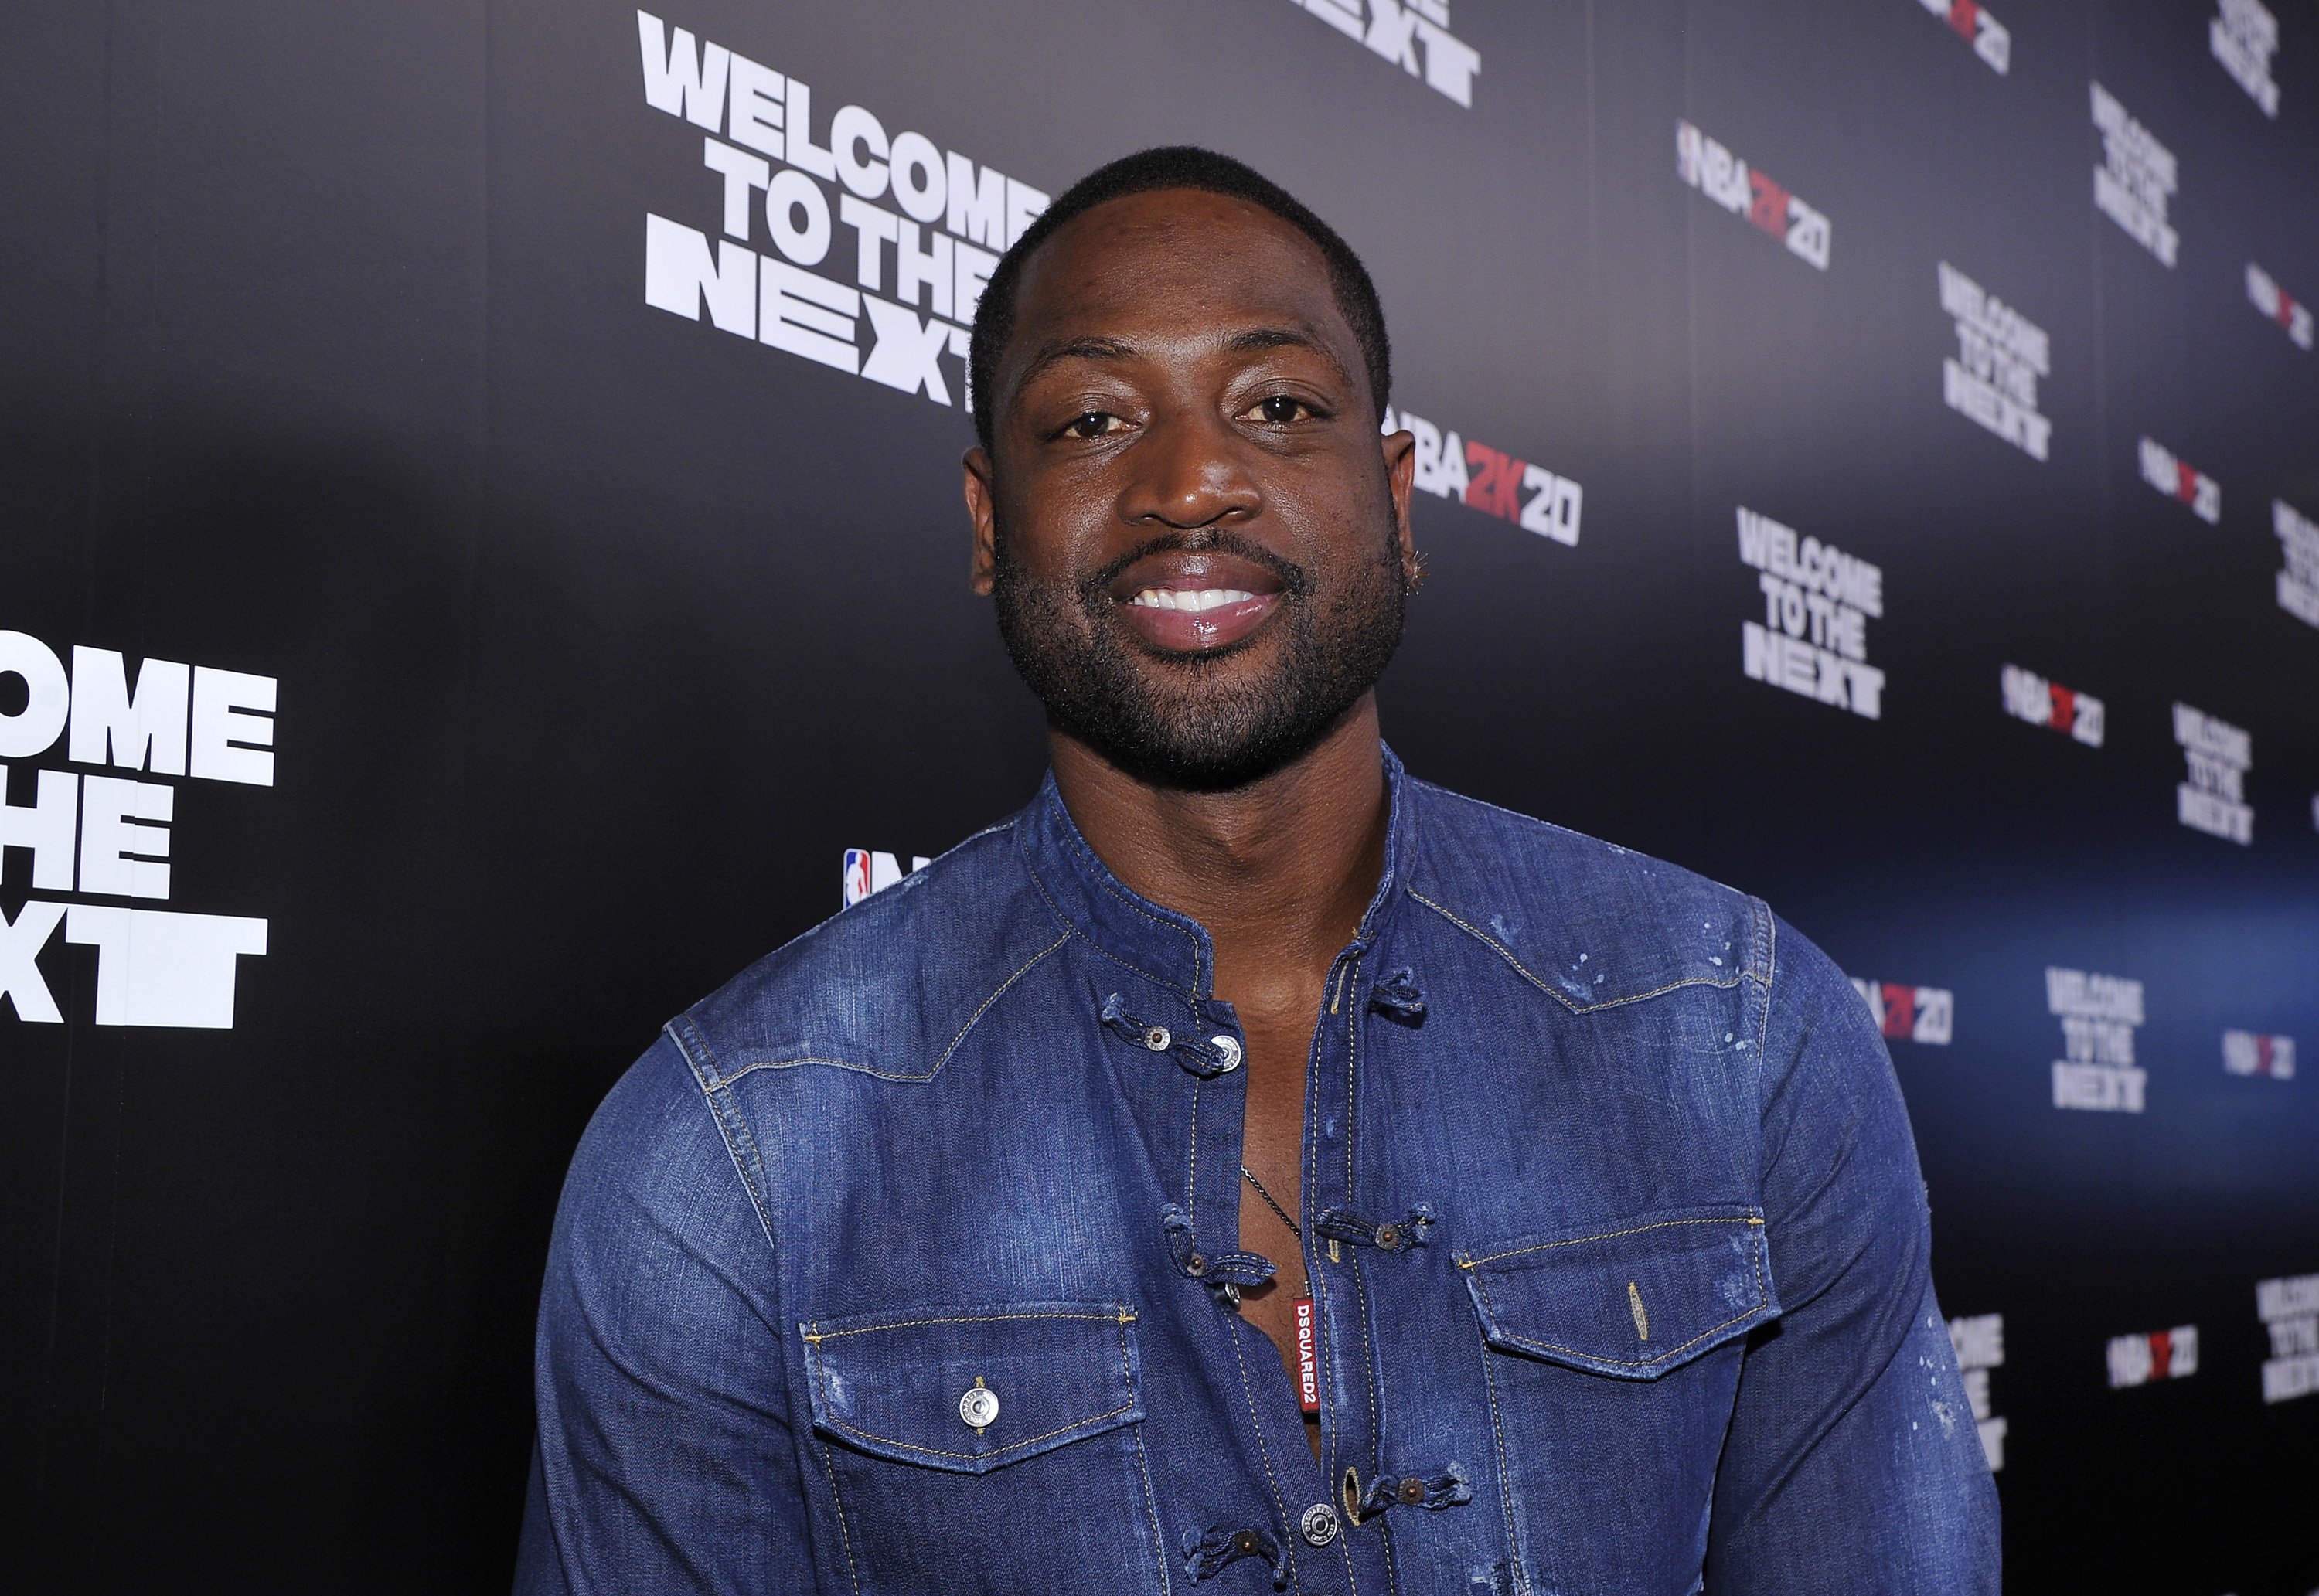 Dwyane Wade attends the NBA 2K20: Welcome to the Next on September 05, 2019 in Los Angeles, California. | Source: Getty Images